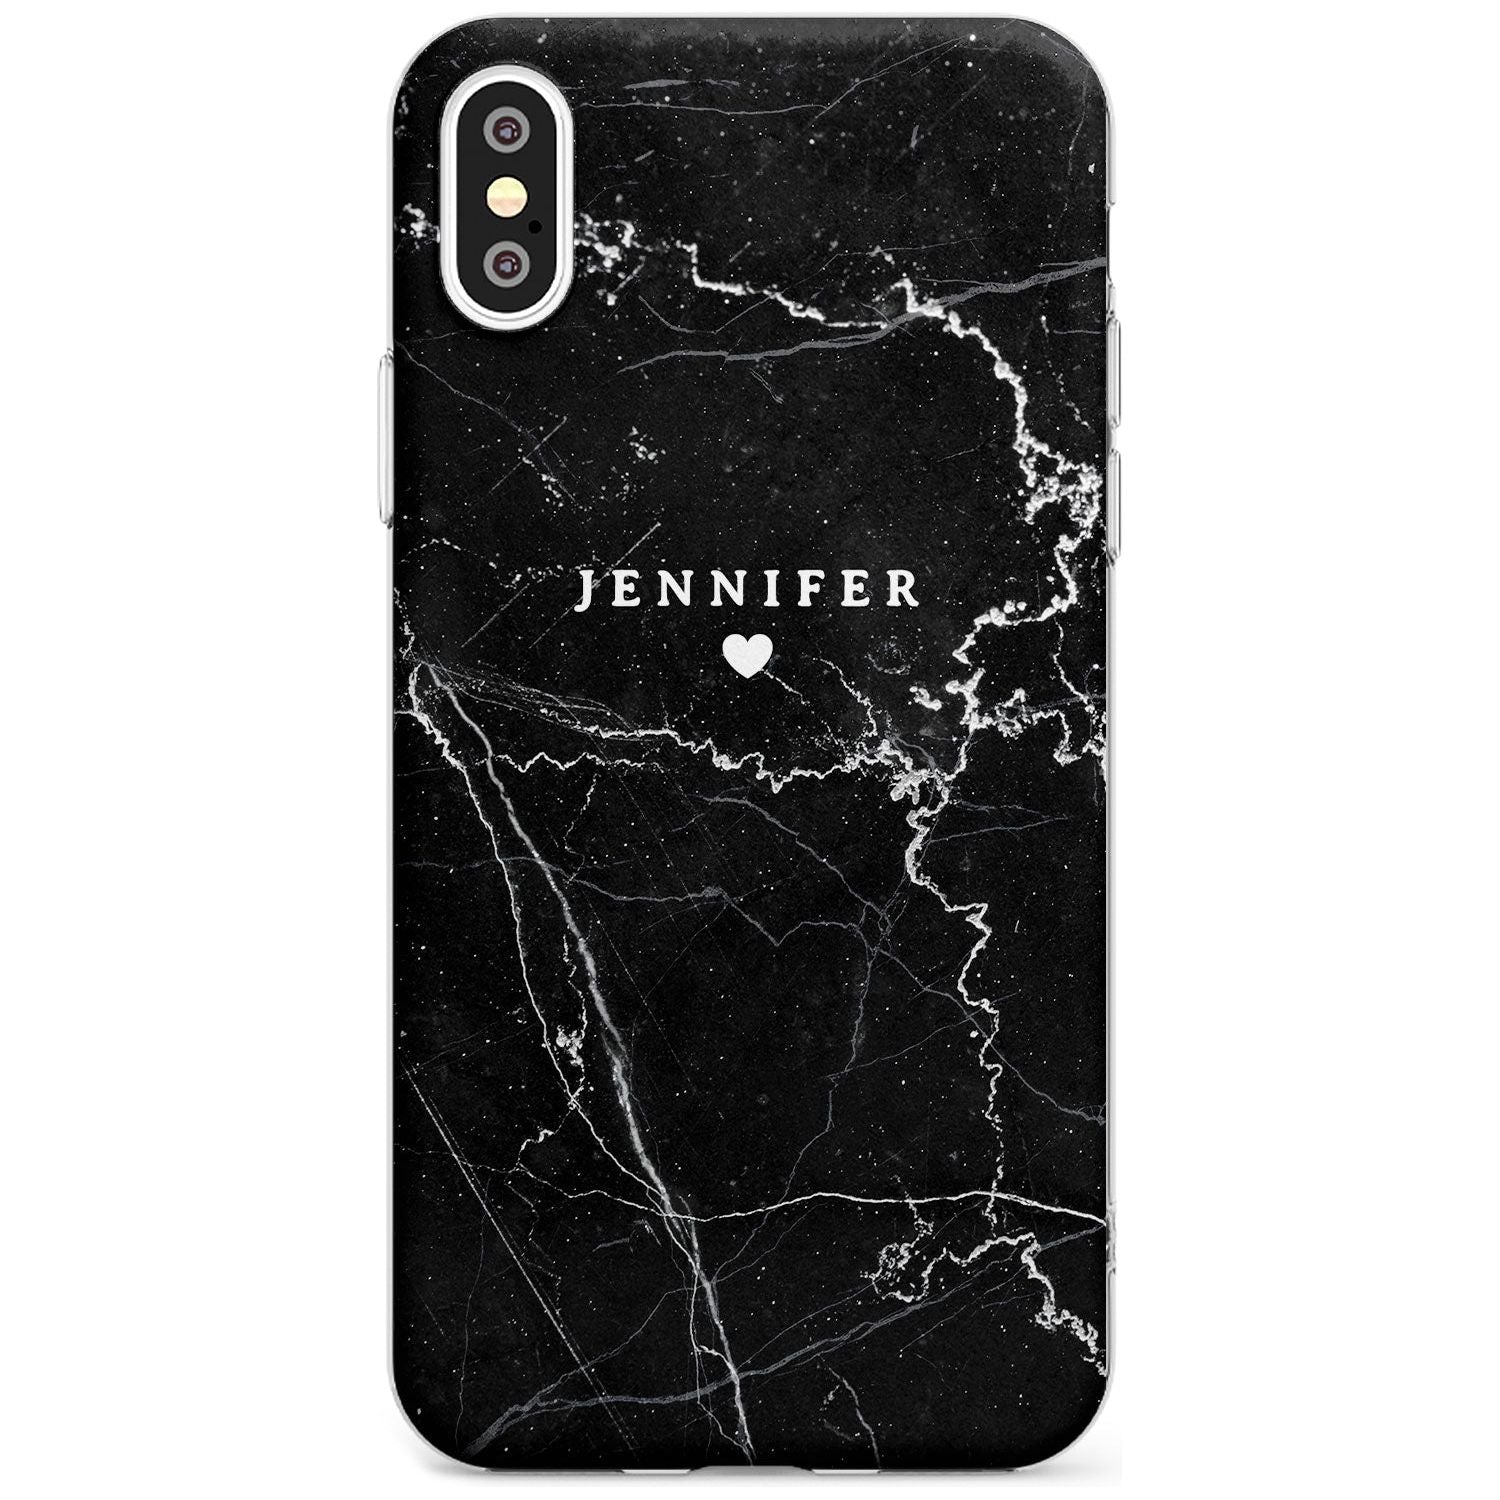 Personalised Black Marble Black Impact Phone Case for iPhone X XS Max XR